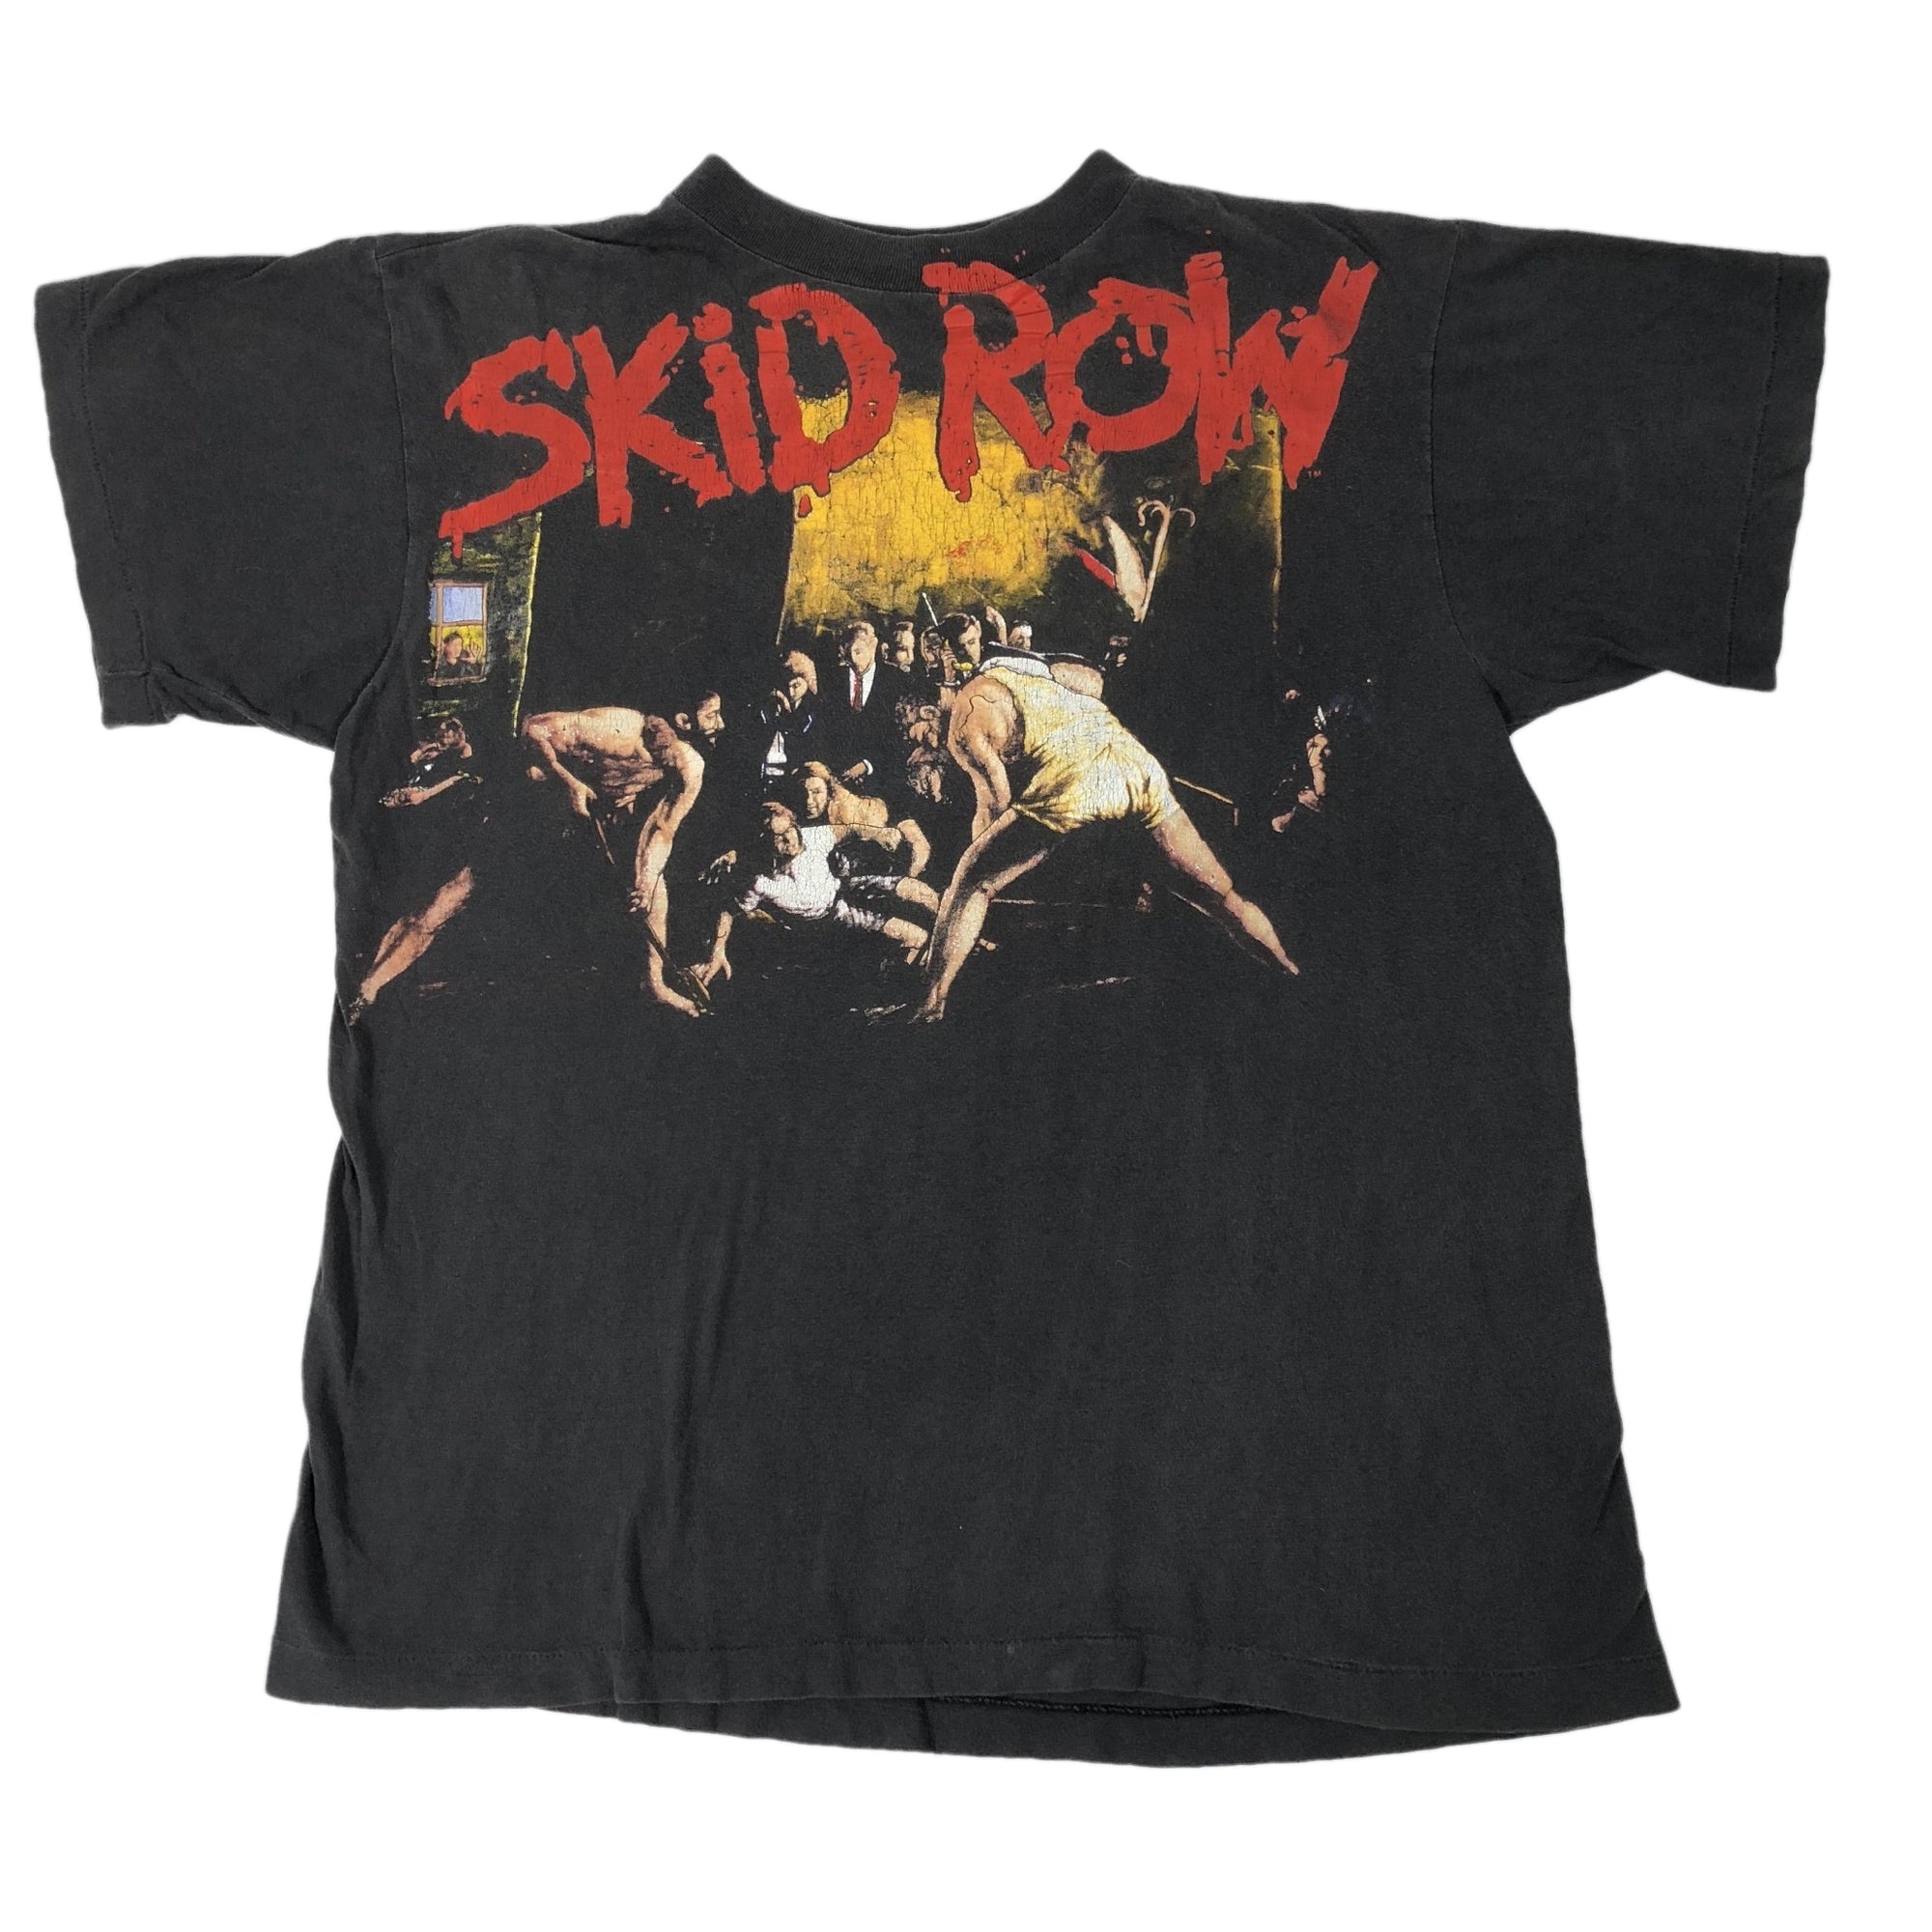 Vintage Skid Row "Slave To The Grind" T-Shirt - jointcustodydc